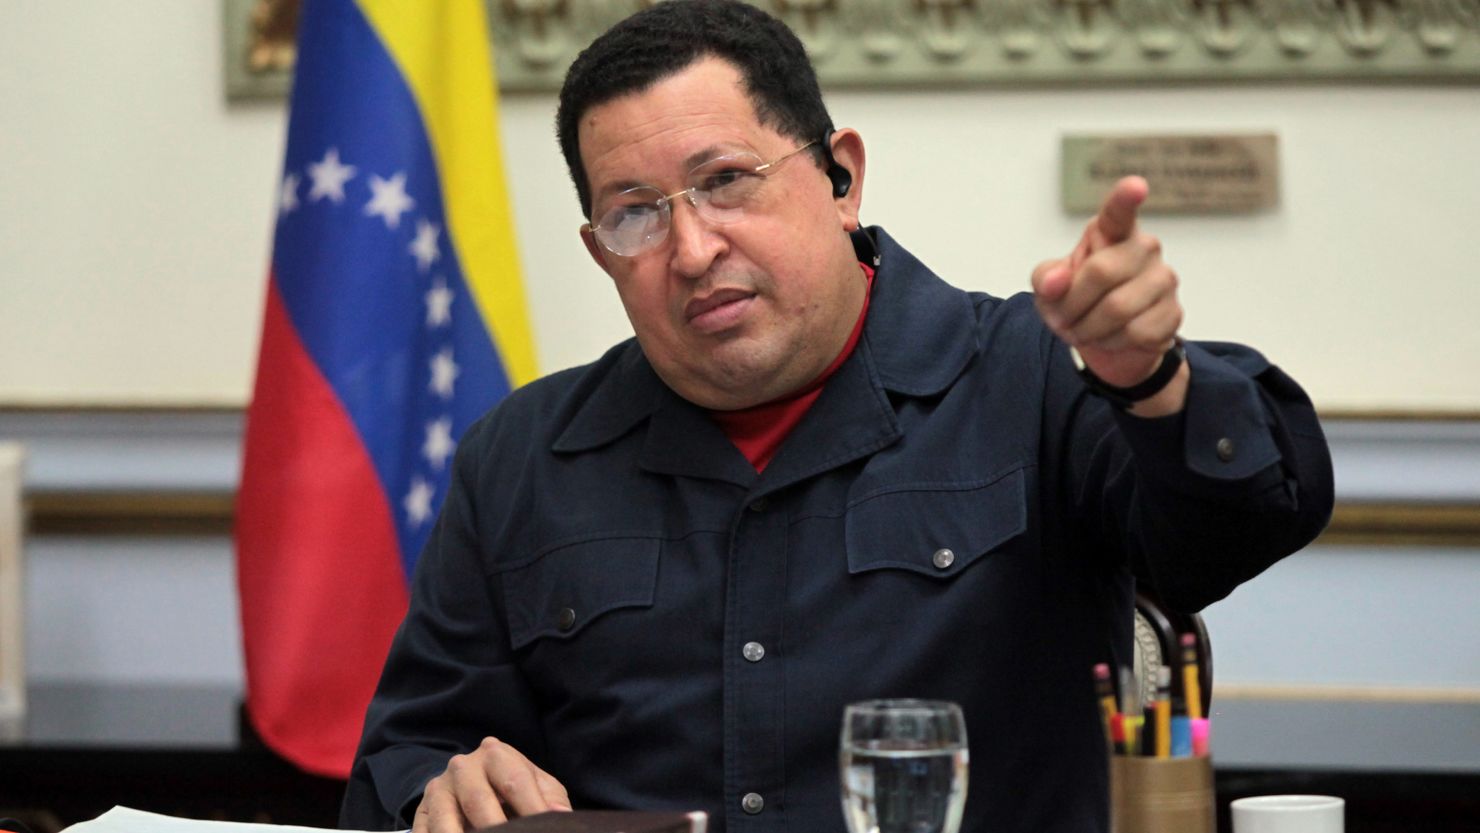 Officials said Venezuelan President Hugo Chavez will travel to Cuba to continue medical treatment.